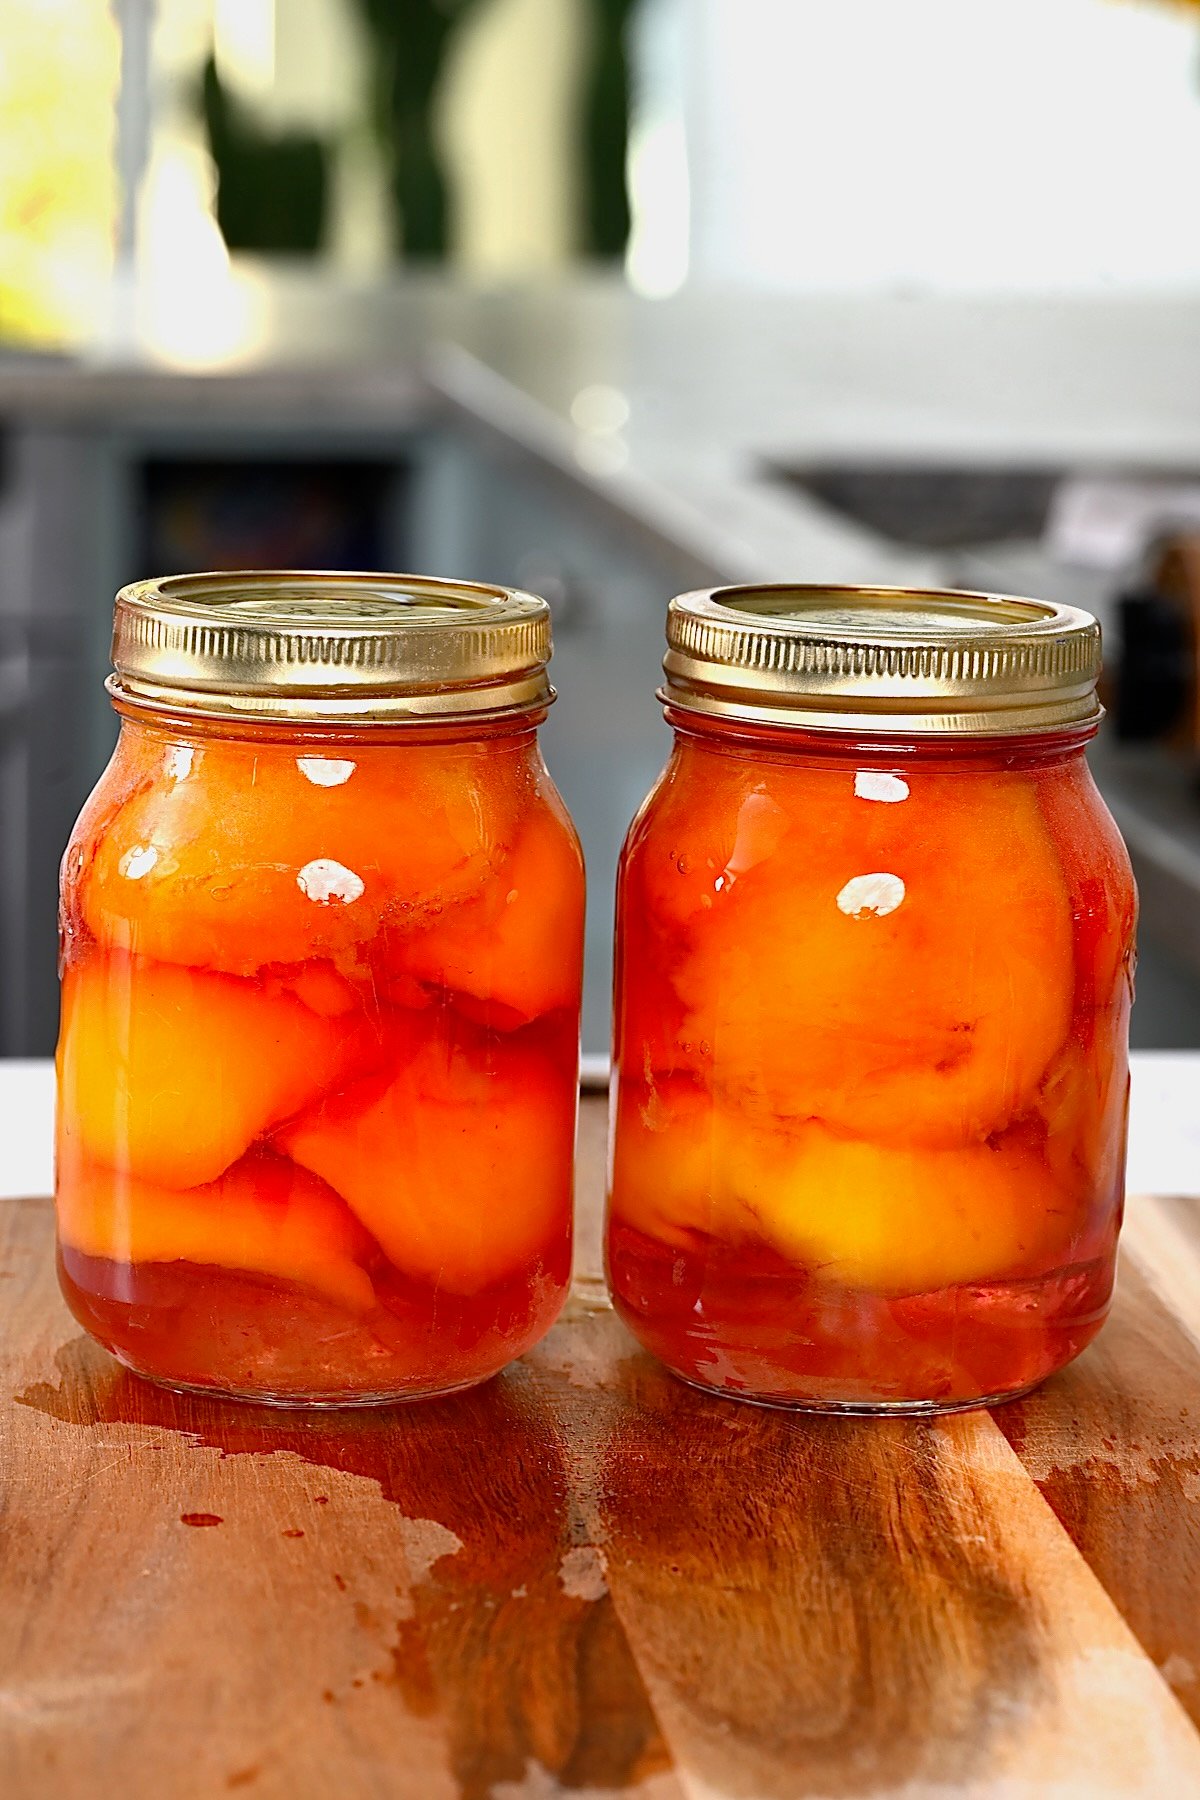 Two jars with canned peaches in light syrup